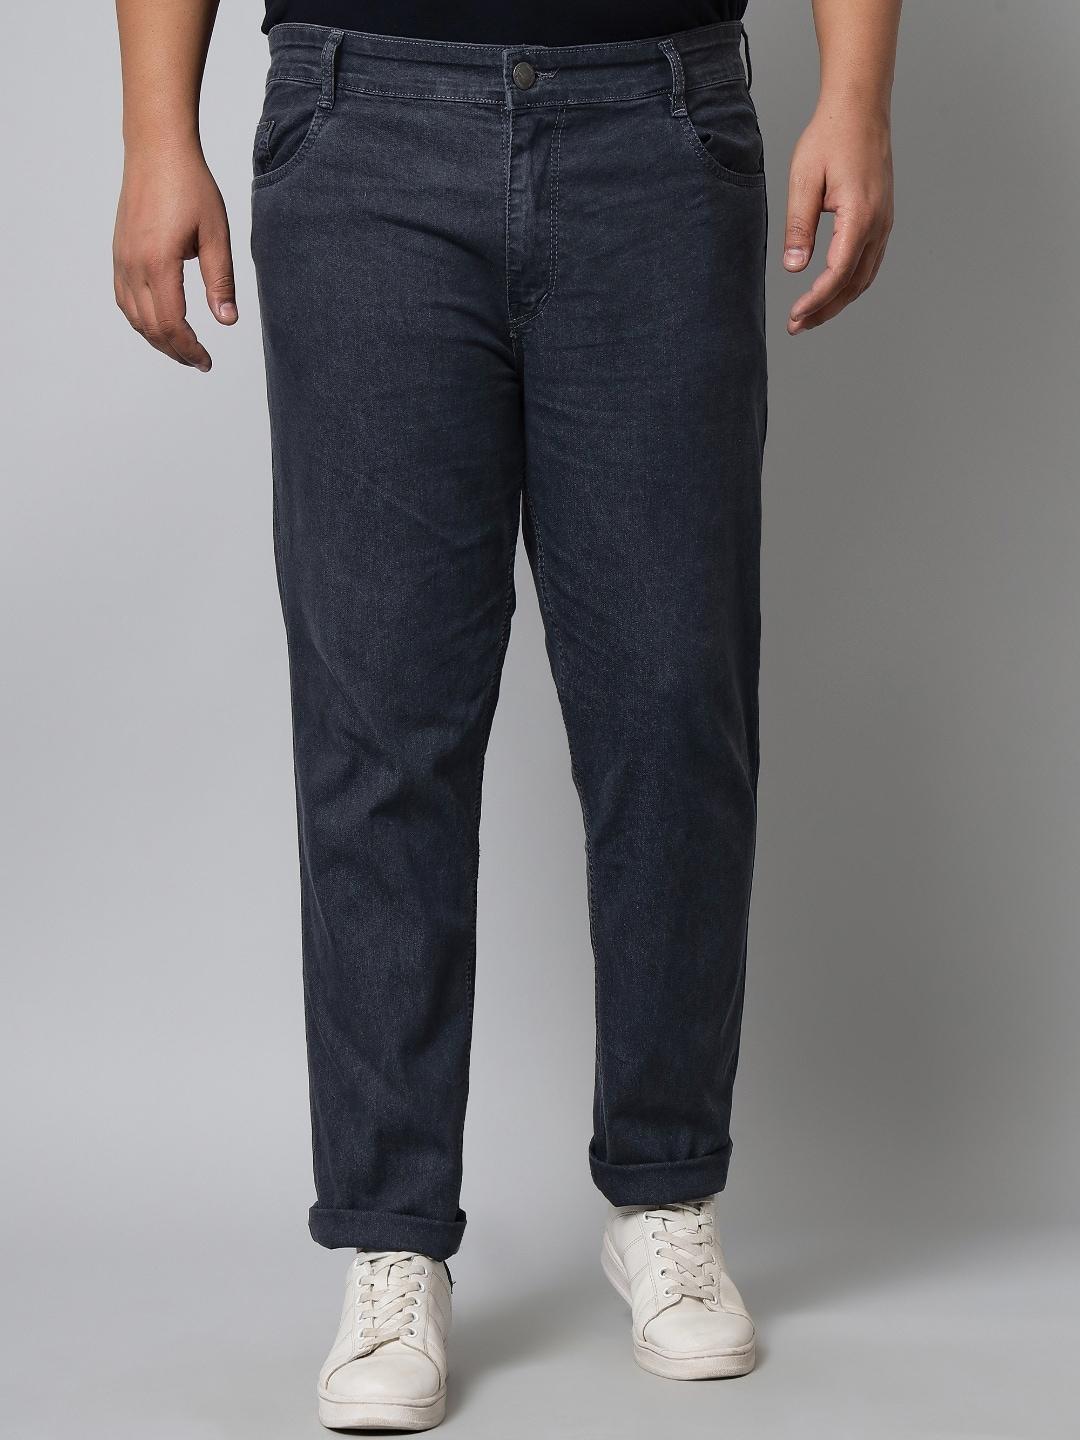 STUDIO NEXX Slim Fit Mid-Rise Clean Look Stretchable Jeans